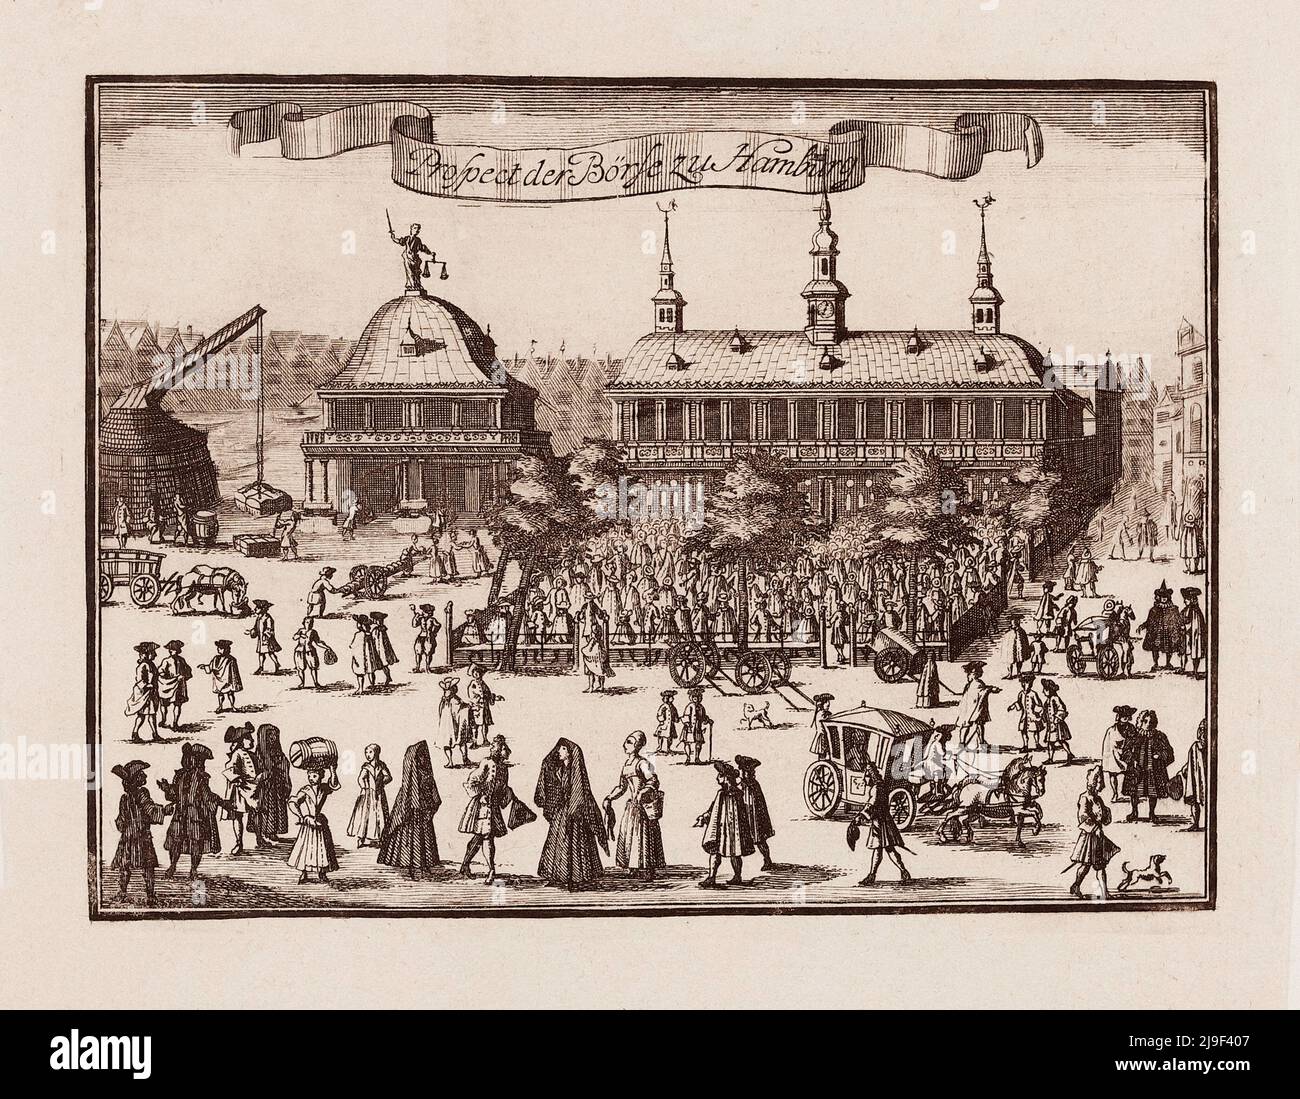 18th-century engraving of prospect of Stock Exchange in Hamburg.  The Hamburg Stock Exchange (German: Hamburger Börse) is the oldest stock exchange in Stock Photo